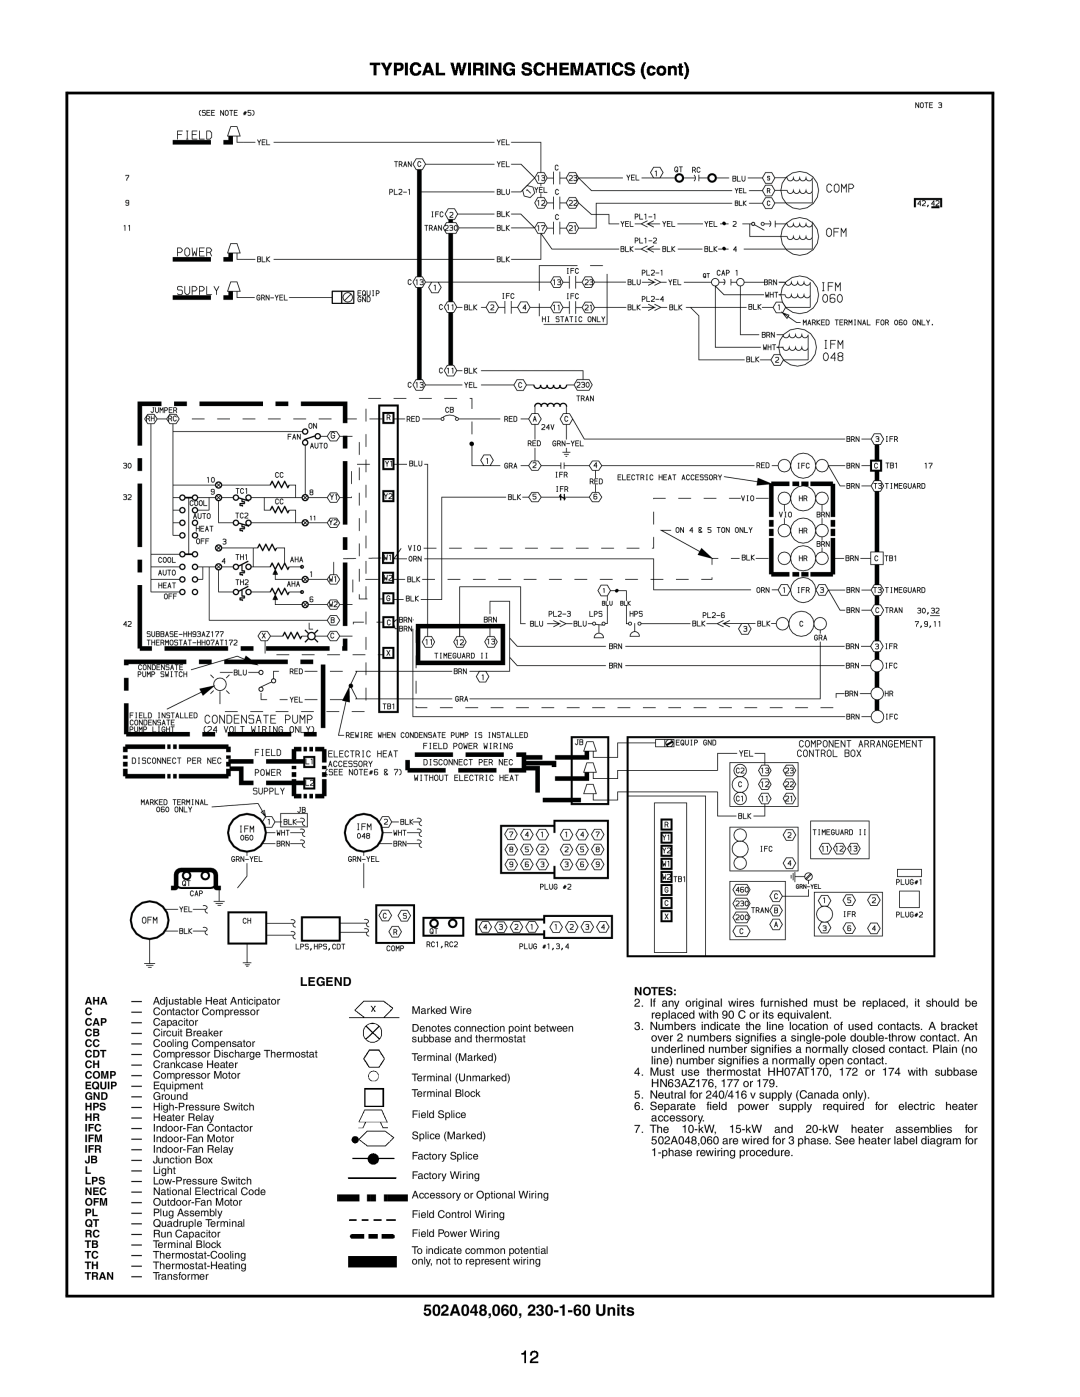 Bryant manual 502A048,060, 230-1-60Units, TYPICAL WIRING SCHEMATICS cont 